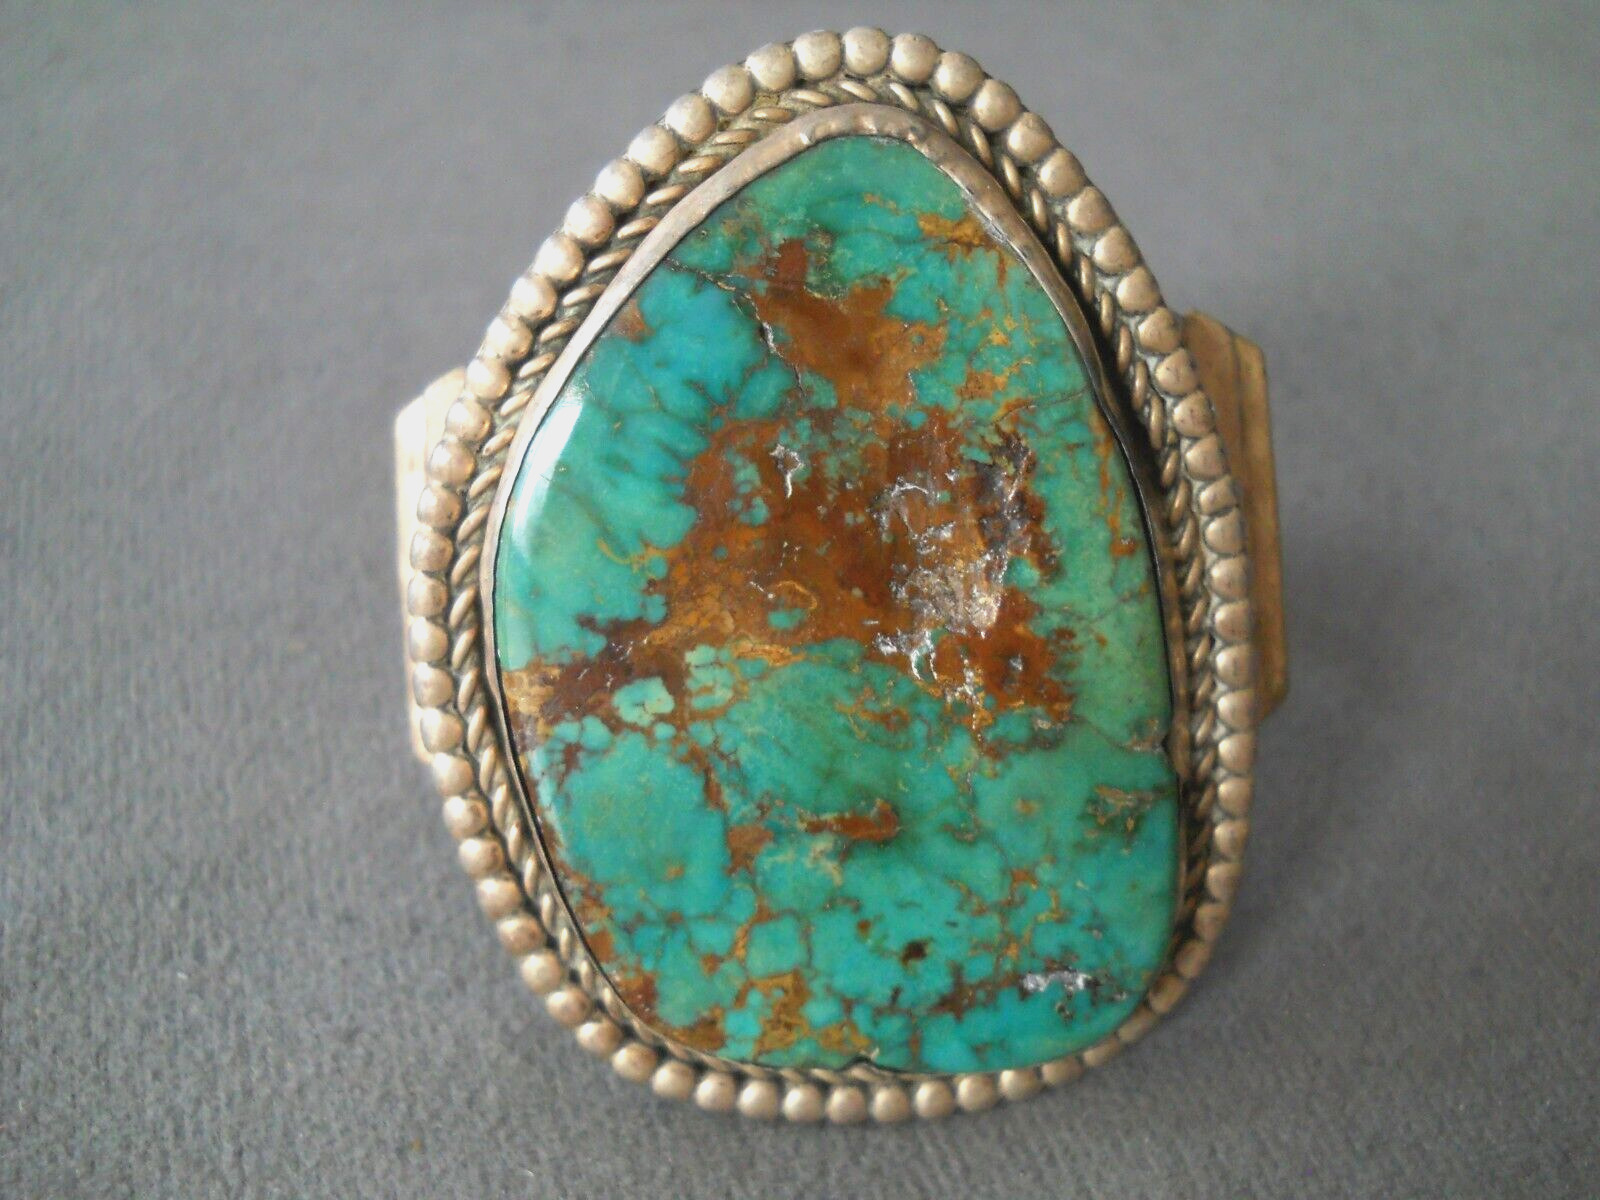 Native American Navajo Webbed Royston Turquoise Sterling Silver Cuff Bracelet